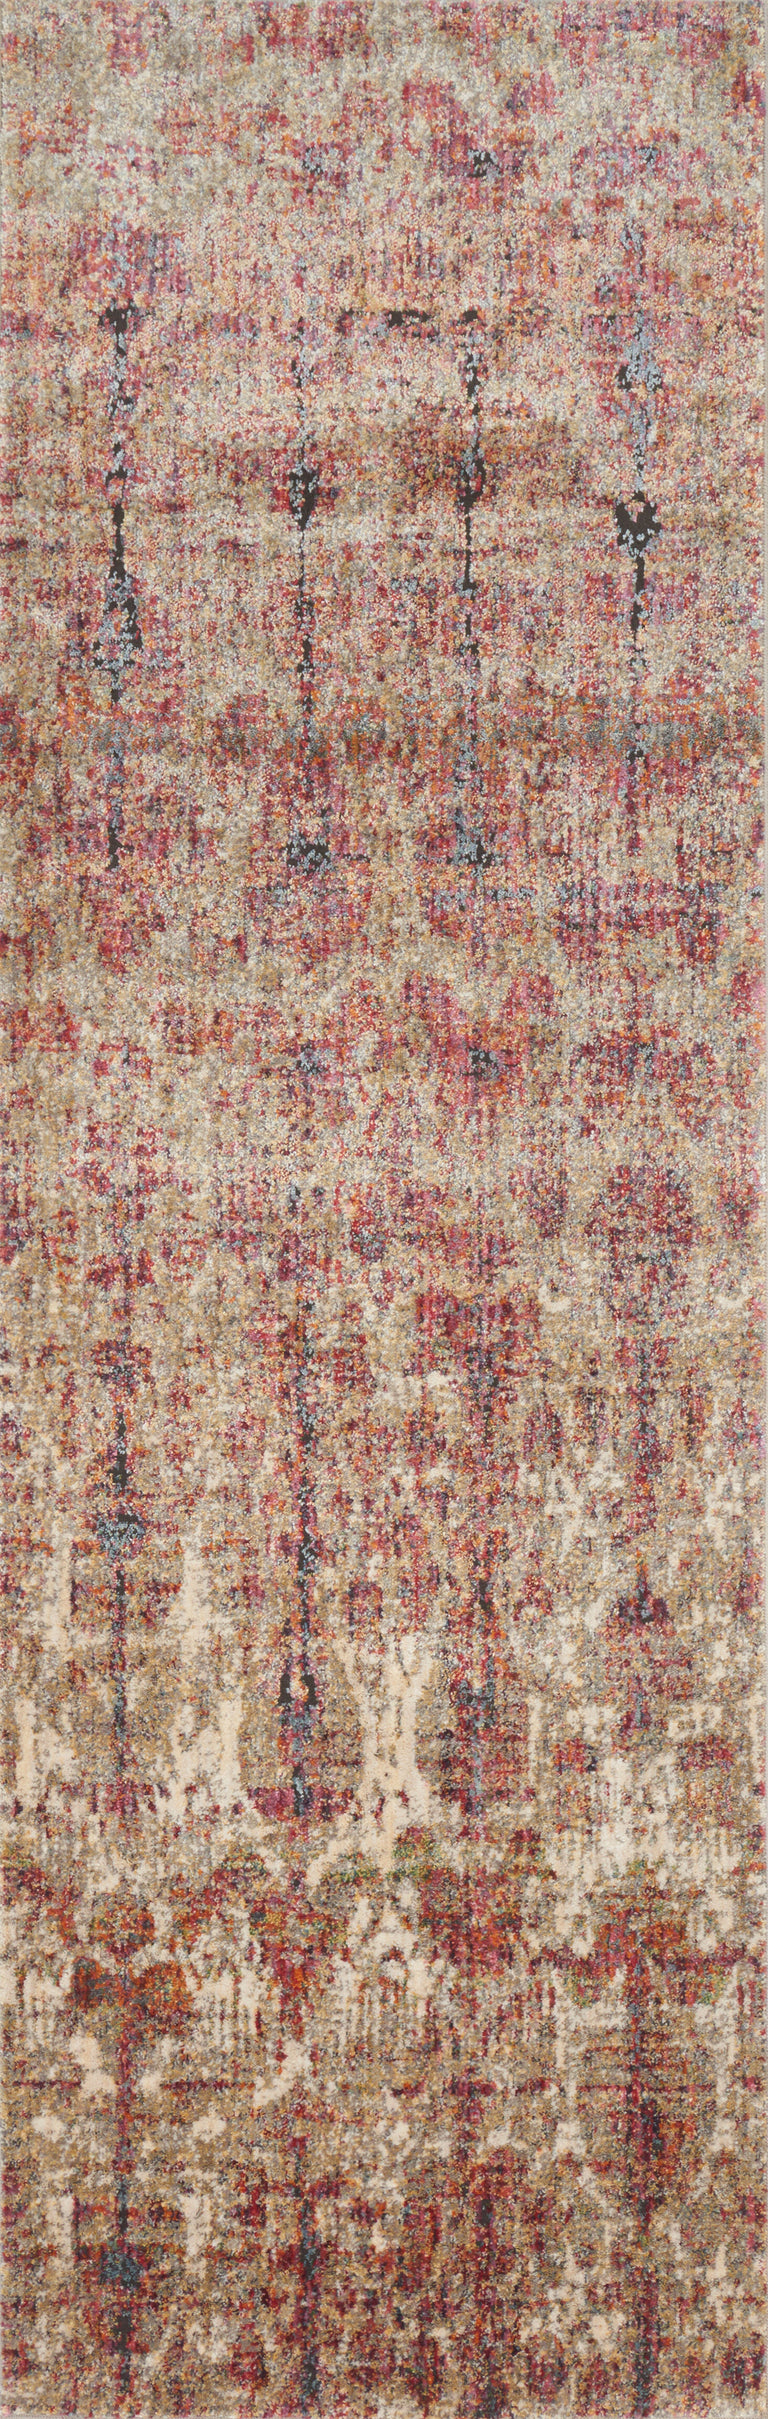 Loloi Rugs Javari Collection Rug in Drizzle, Berry - 9'6" x 12'6"